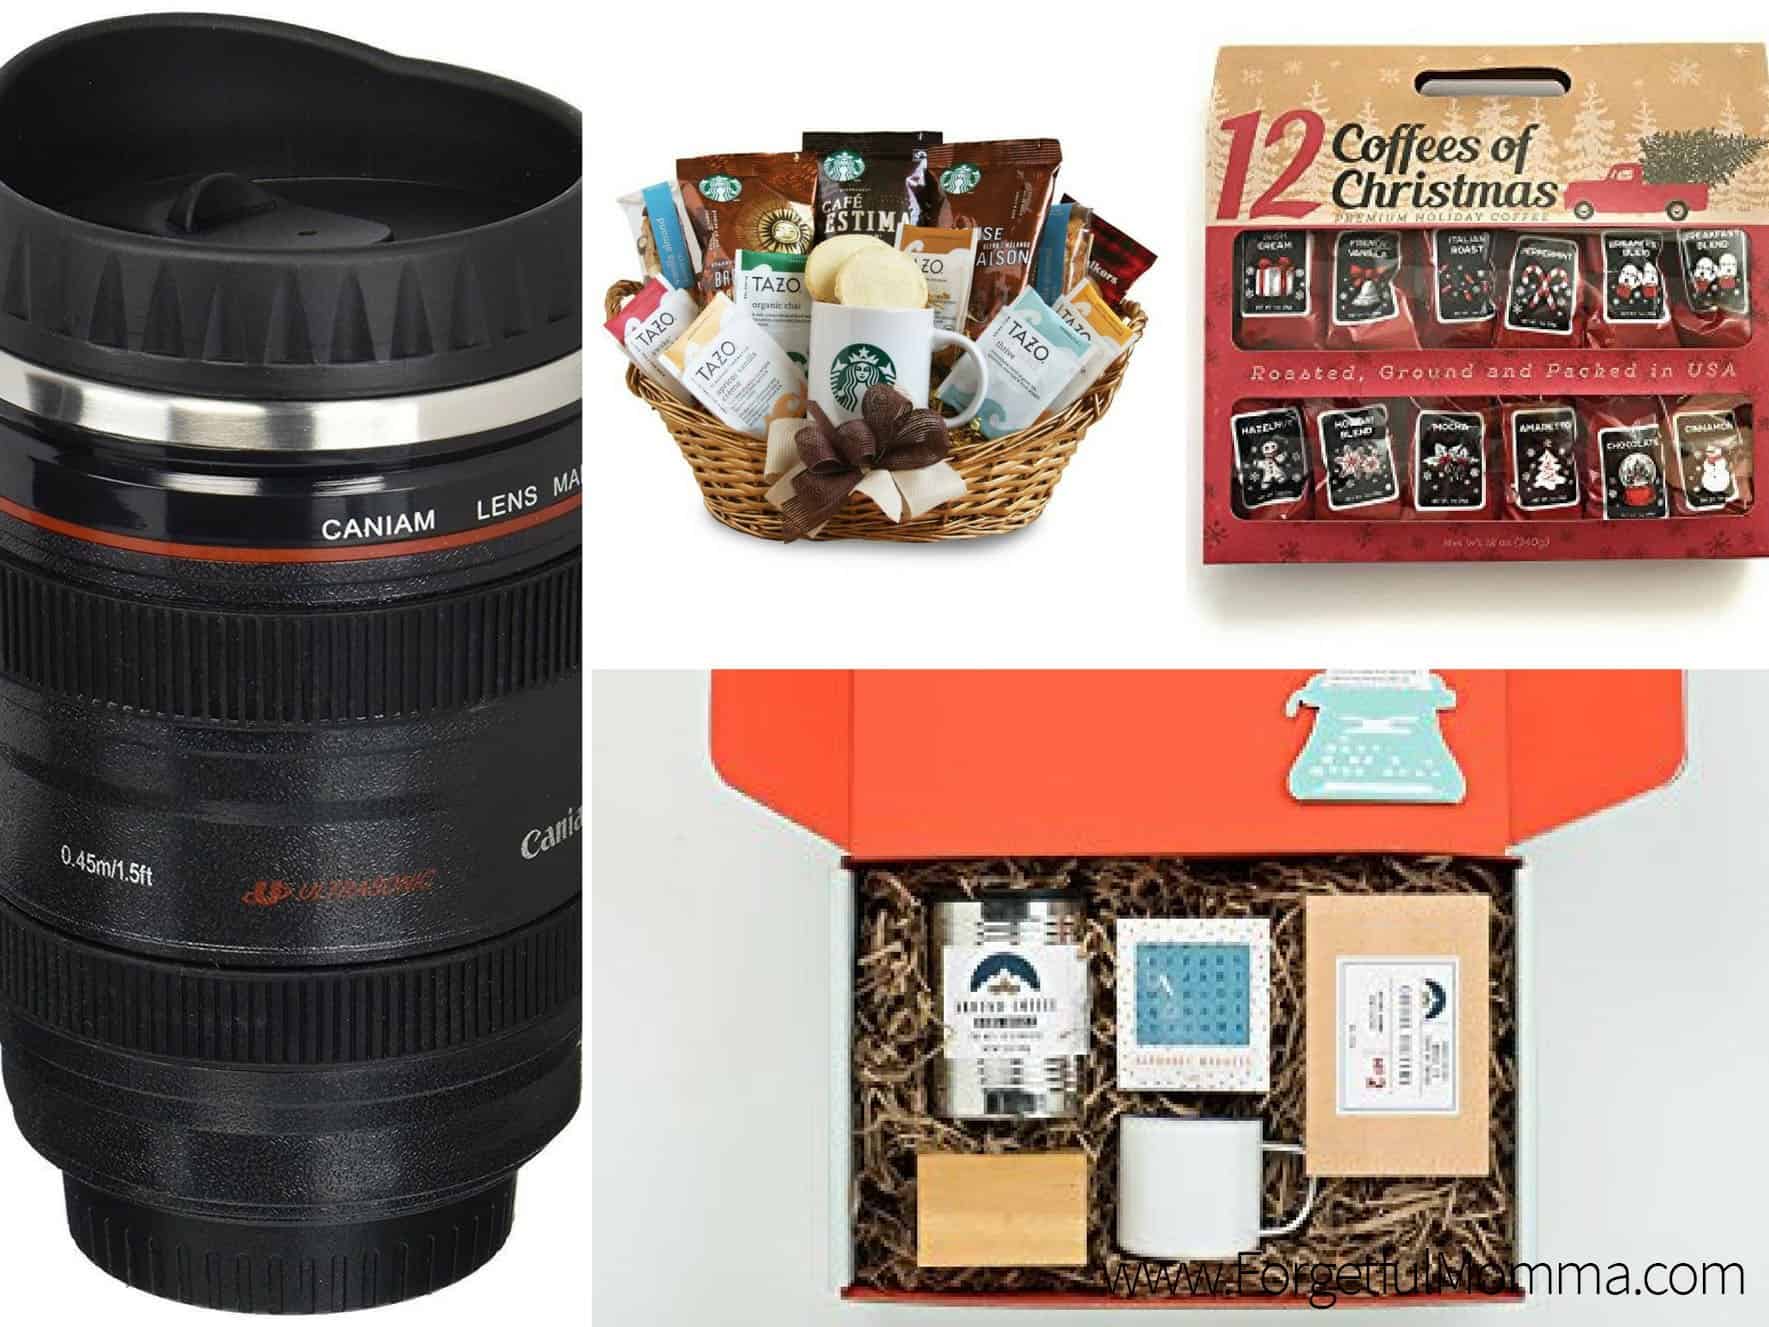 10 Gifts for the Coffee Lover in Your Life